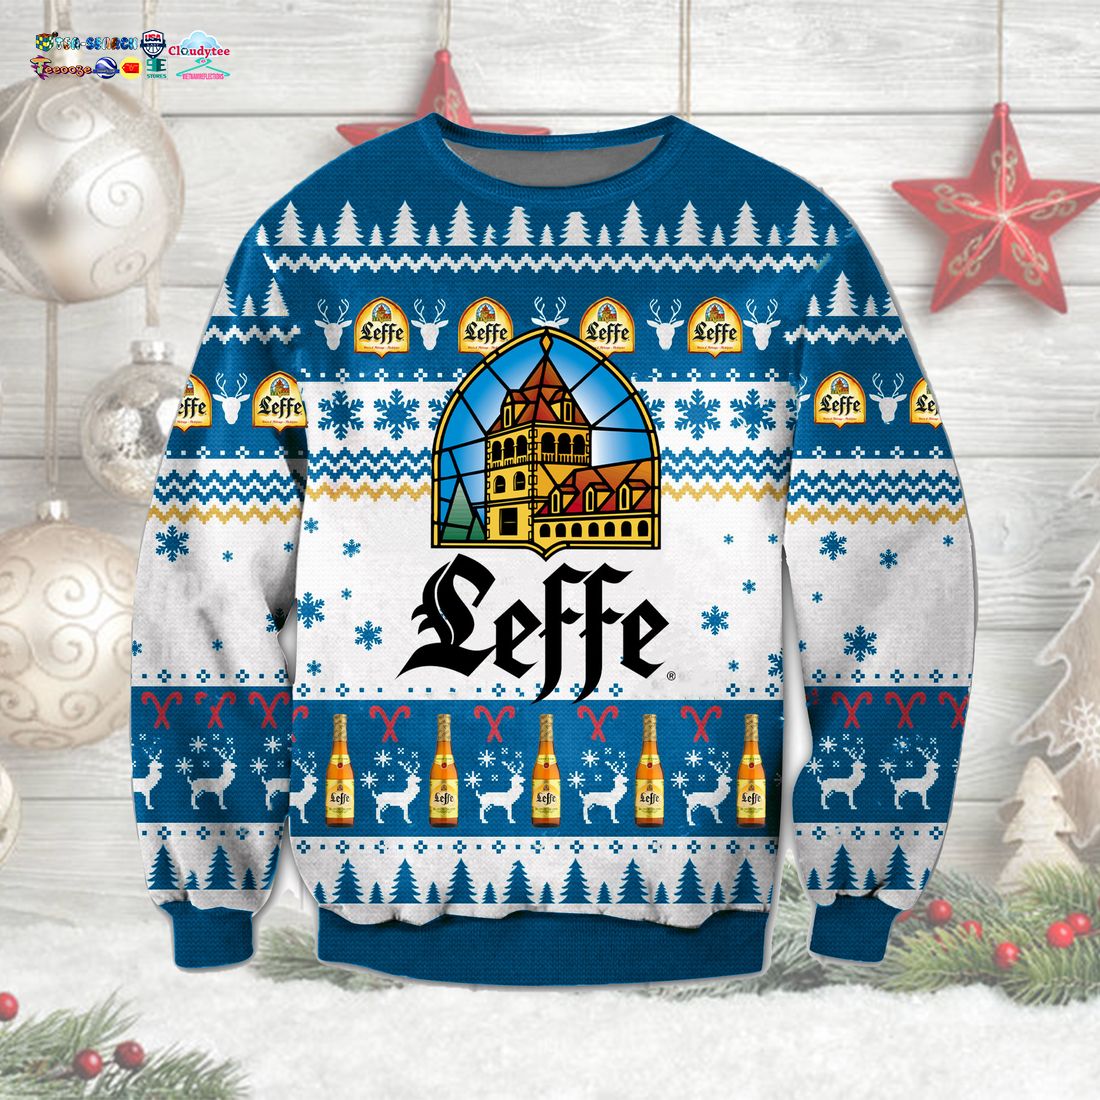 Leffe Ugly Christmas Sweater - Cuteness overloaded